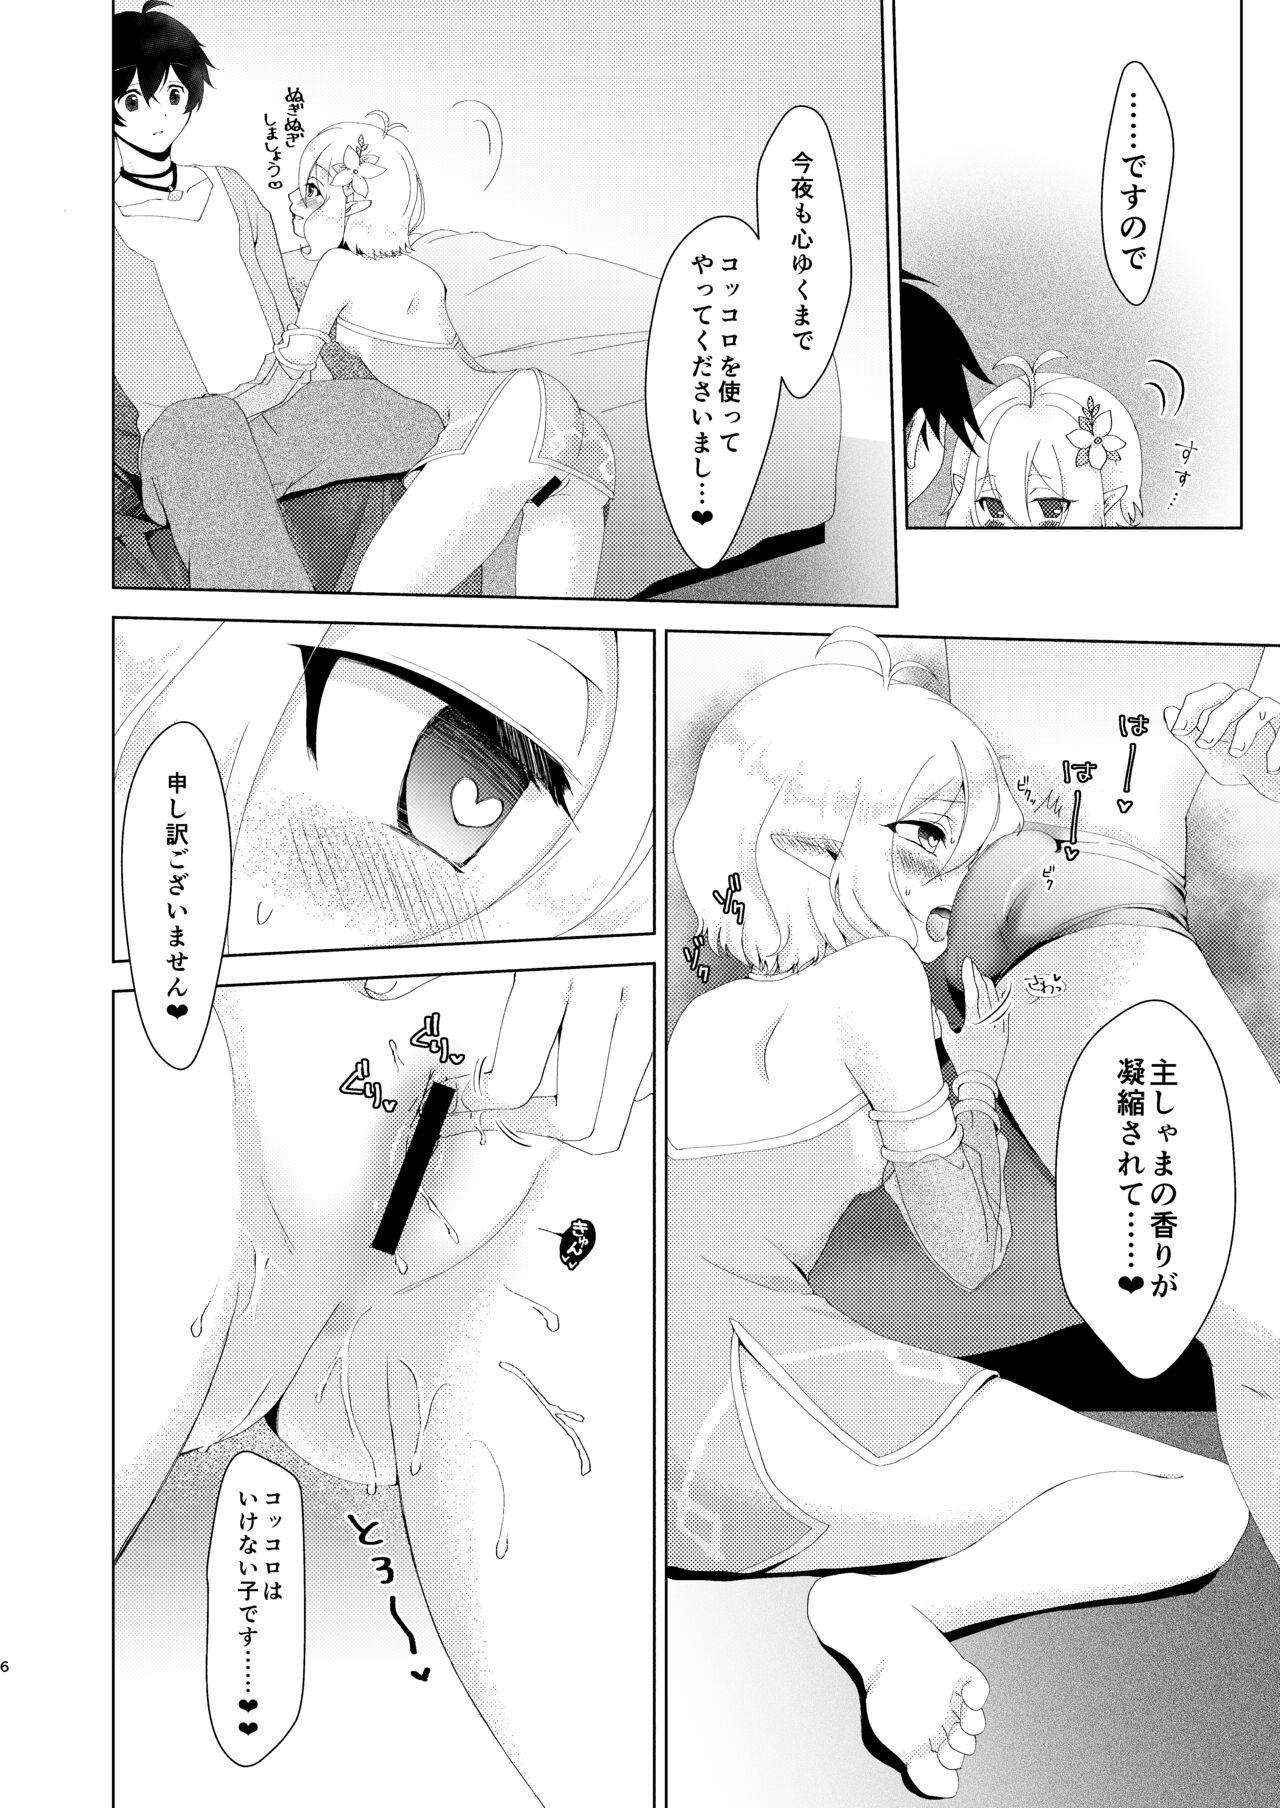 Sapphicerotica Yandere Connect - Princess connect Selfie - Page 4